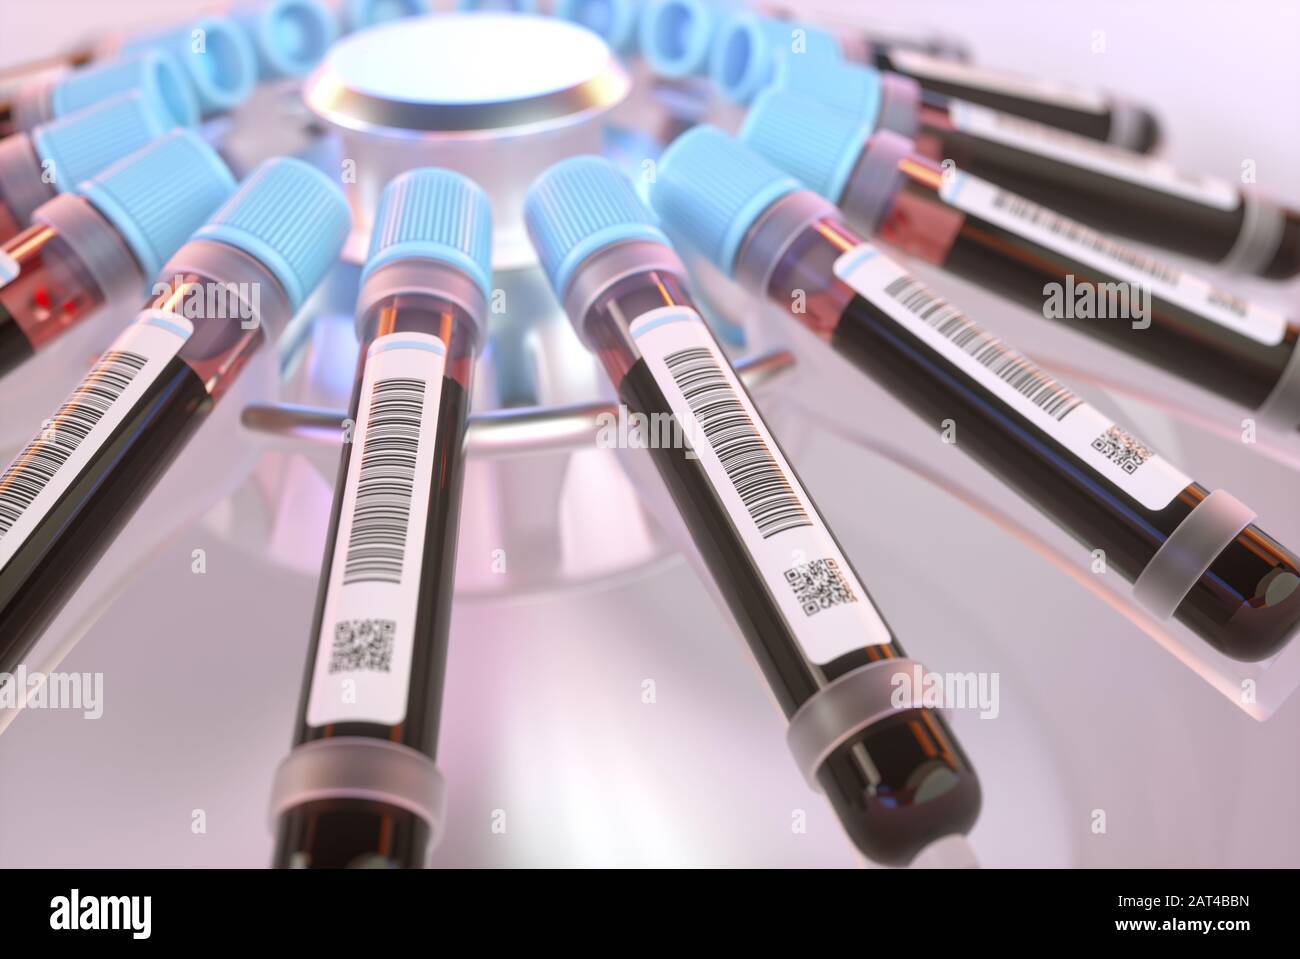 Blood tubes in the centrifuge. Concept image of blood tests, diseases and genetic and laboratory research. Stock Photo